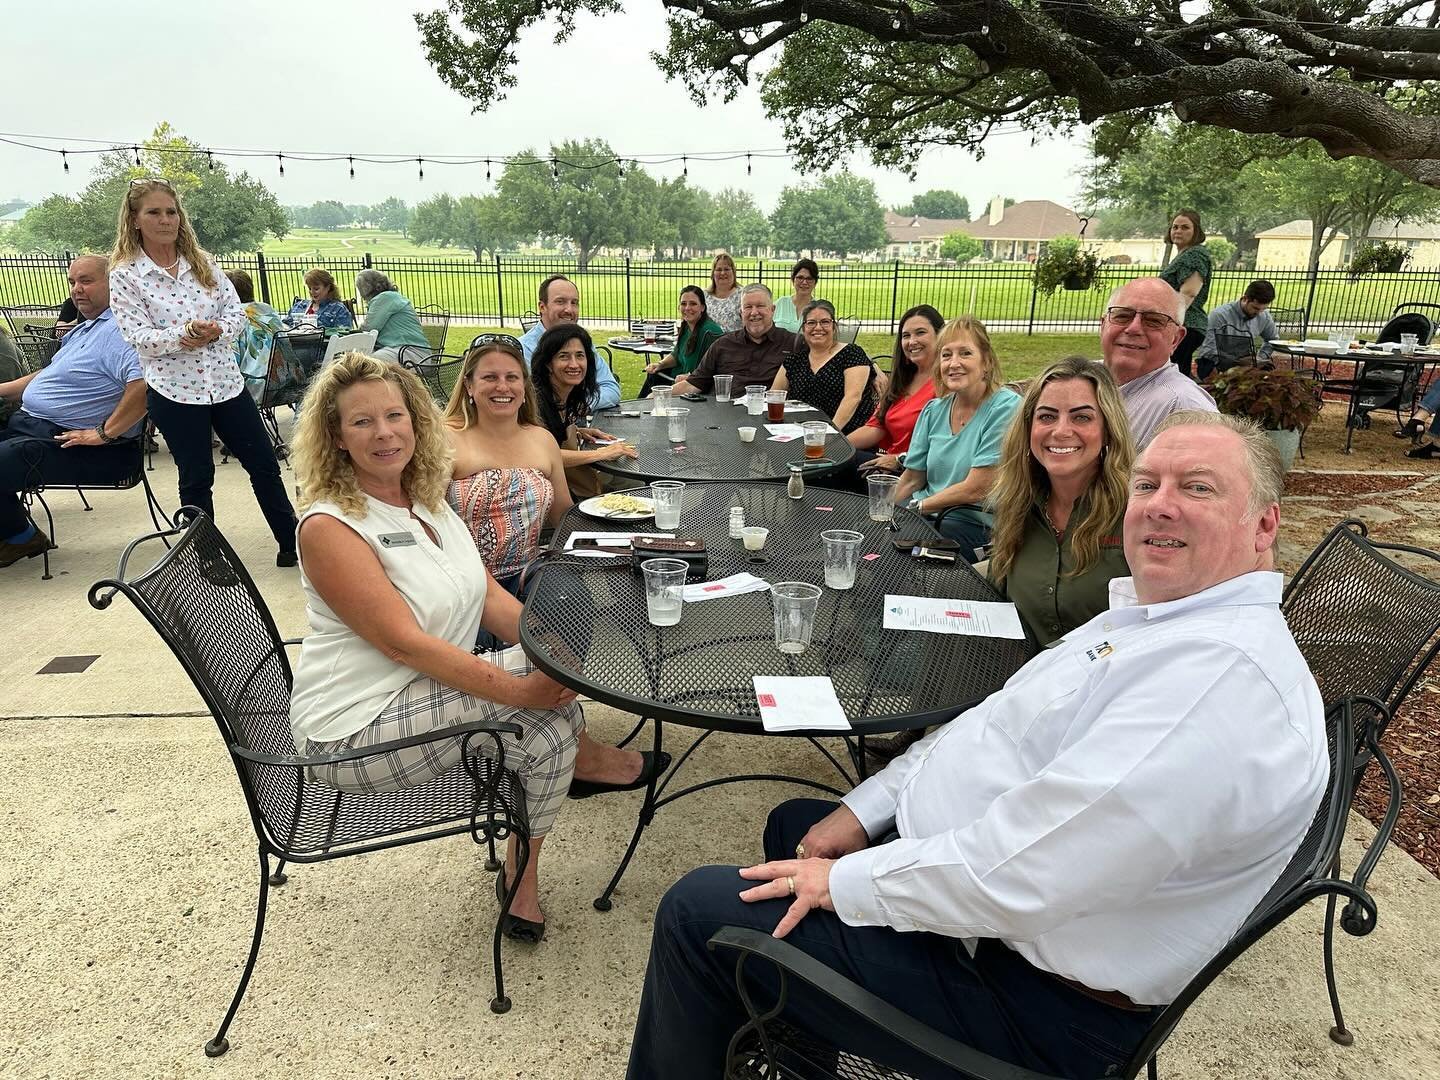 Gathering for community and camaraderie at the Castroville Area Chamber of Commerce&rsquo;s monthly luncheon! Big shoutout to Julianna&rsquo;s for hosting us and treating us to a delicious lunch spread. 🍽️ And a special congratulations to the deserv